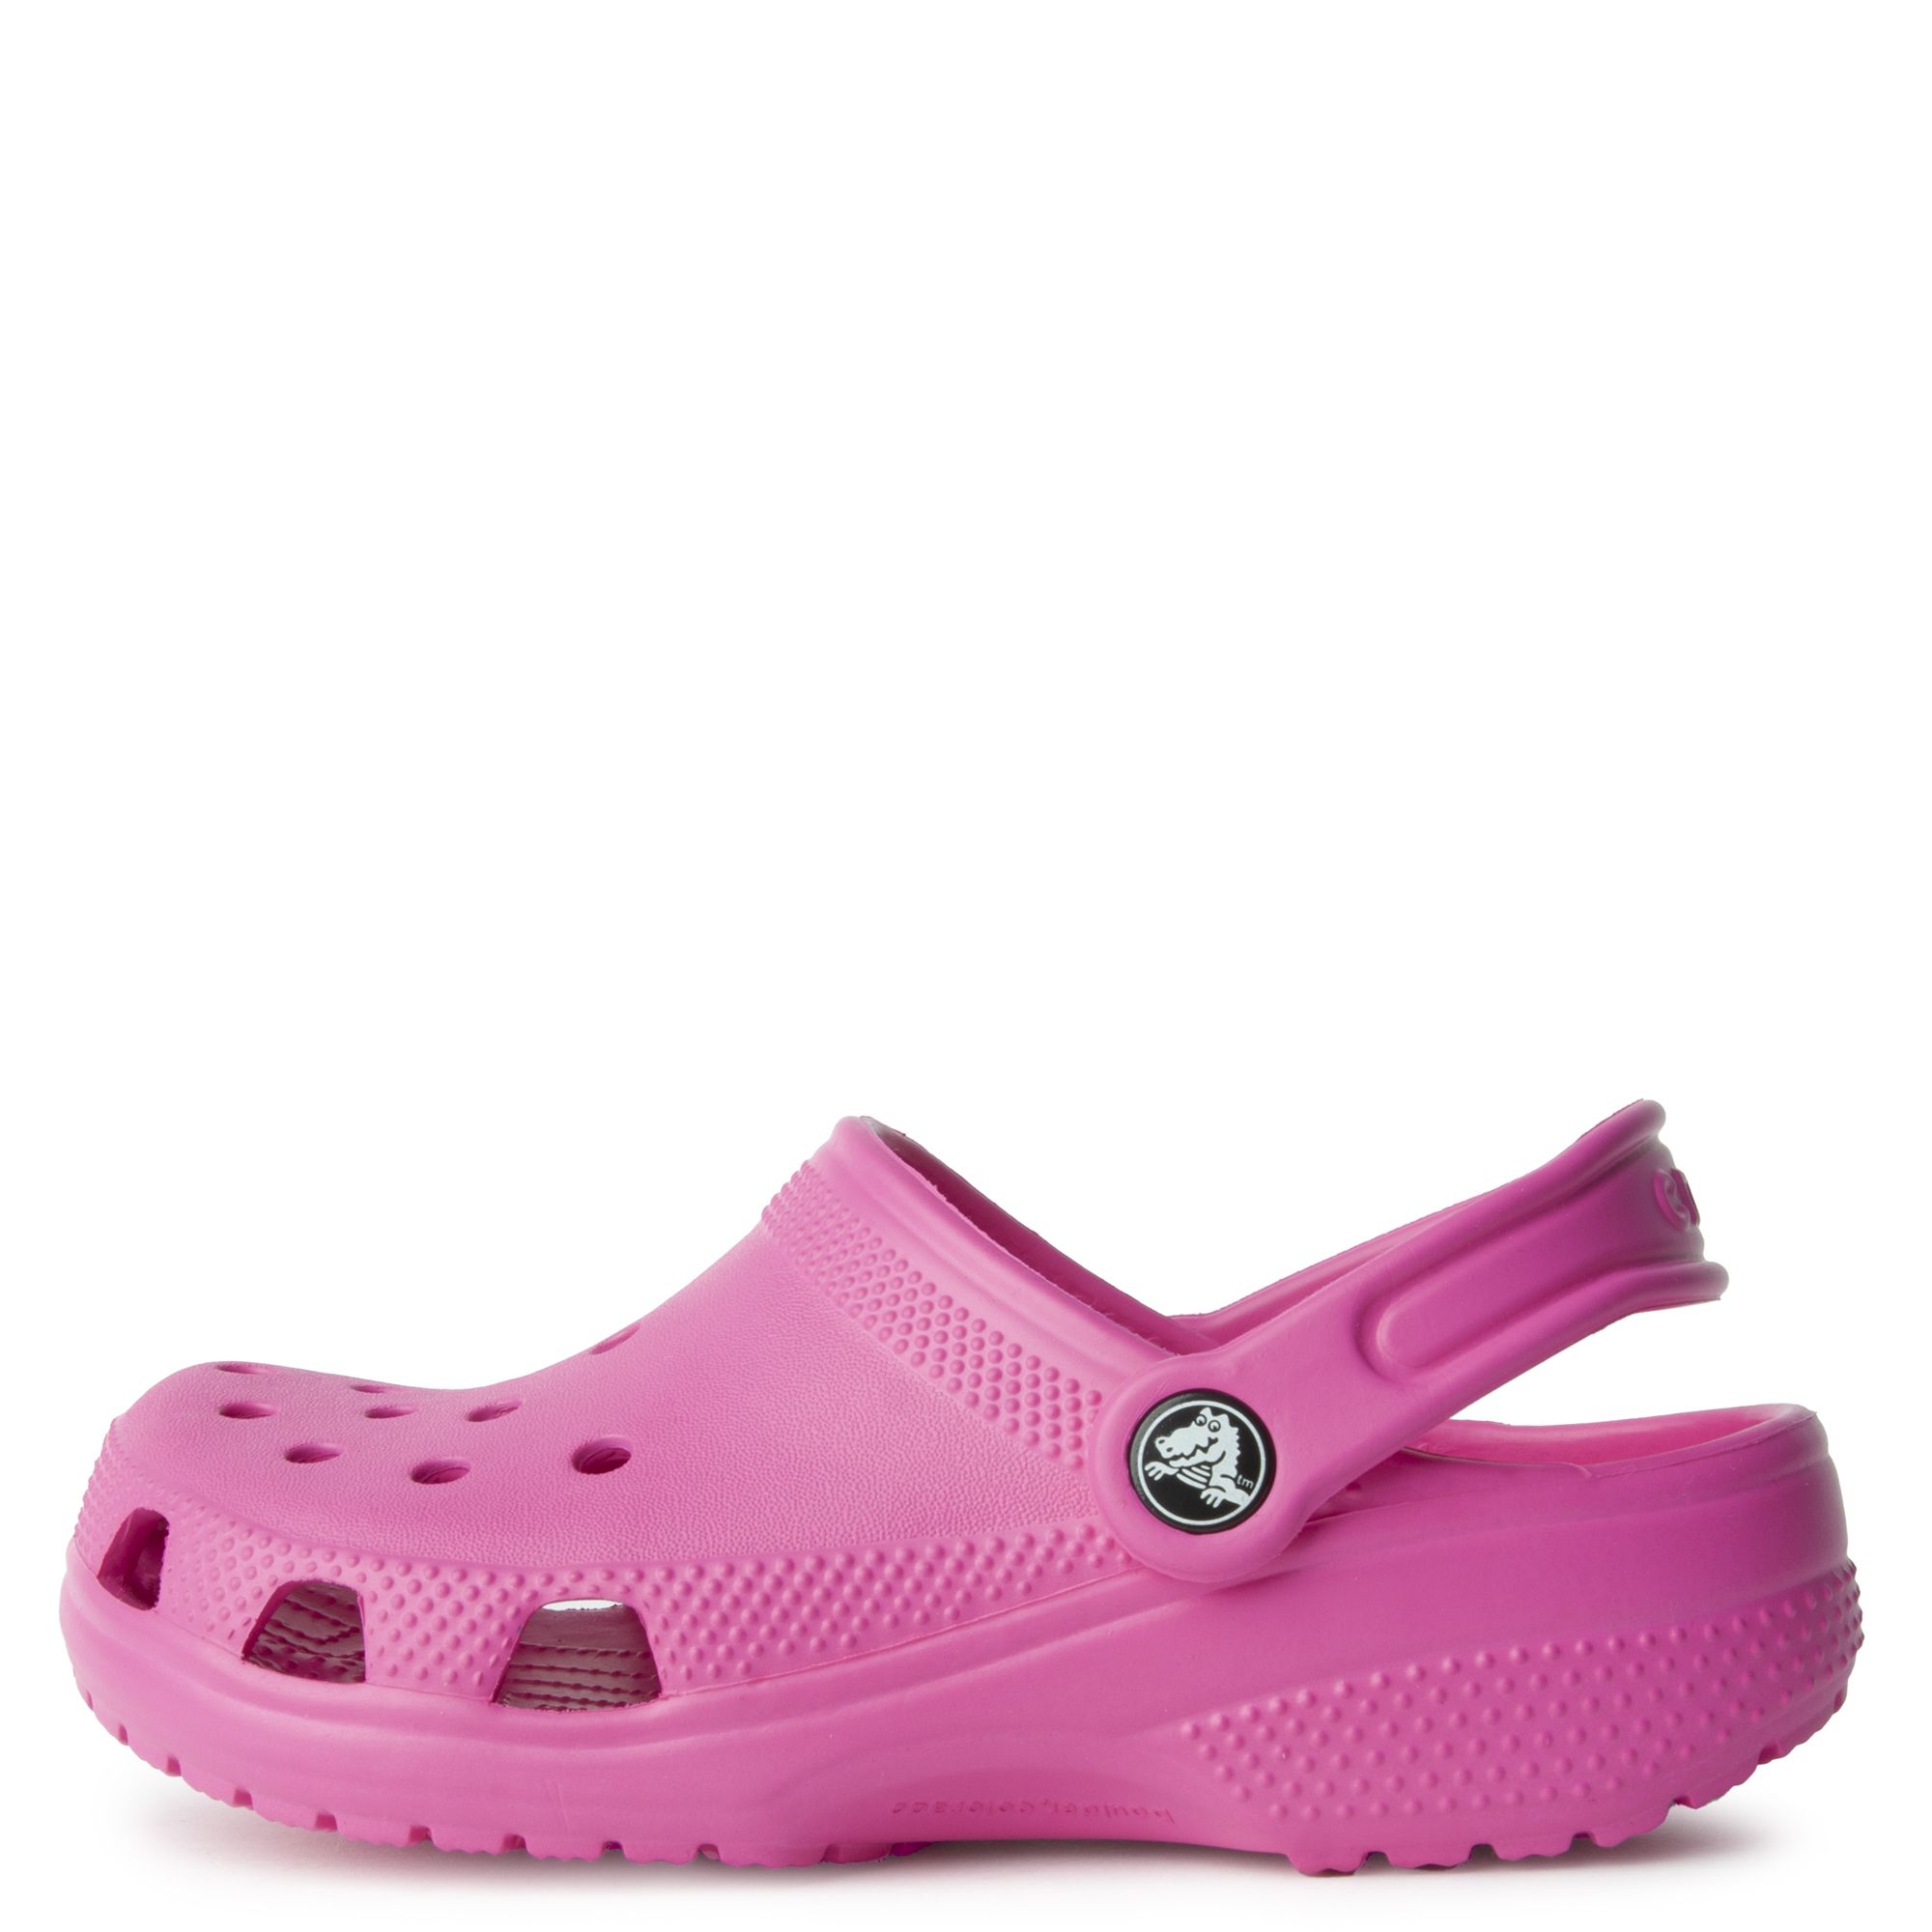 Crocs Clogs For Men Stylish And Funky Foot Wear By Campus Classic Clog Shoes